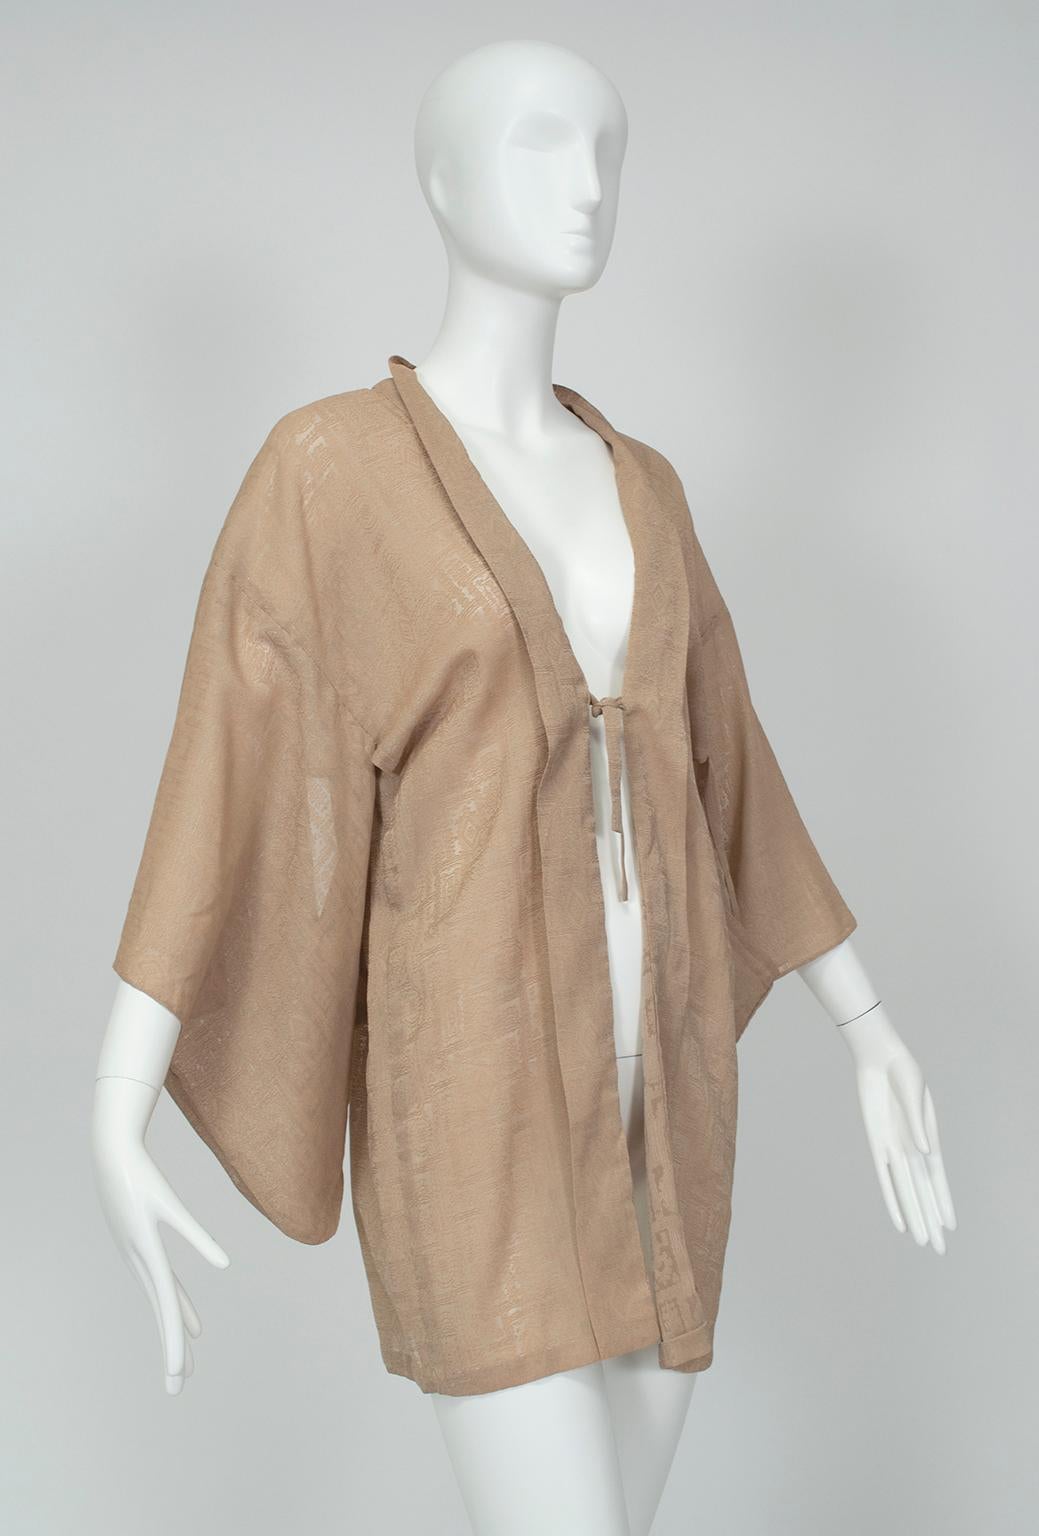 Sometimes called iro muji, short kimonos can act as lingerie cover-ups as well as lightweight blouses or jackets. In a versatile putty color, this unusual version features rich texture and a single tie closure that creates an alluring plunging